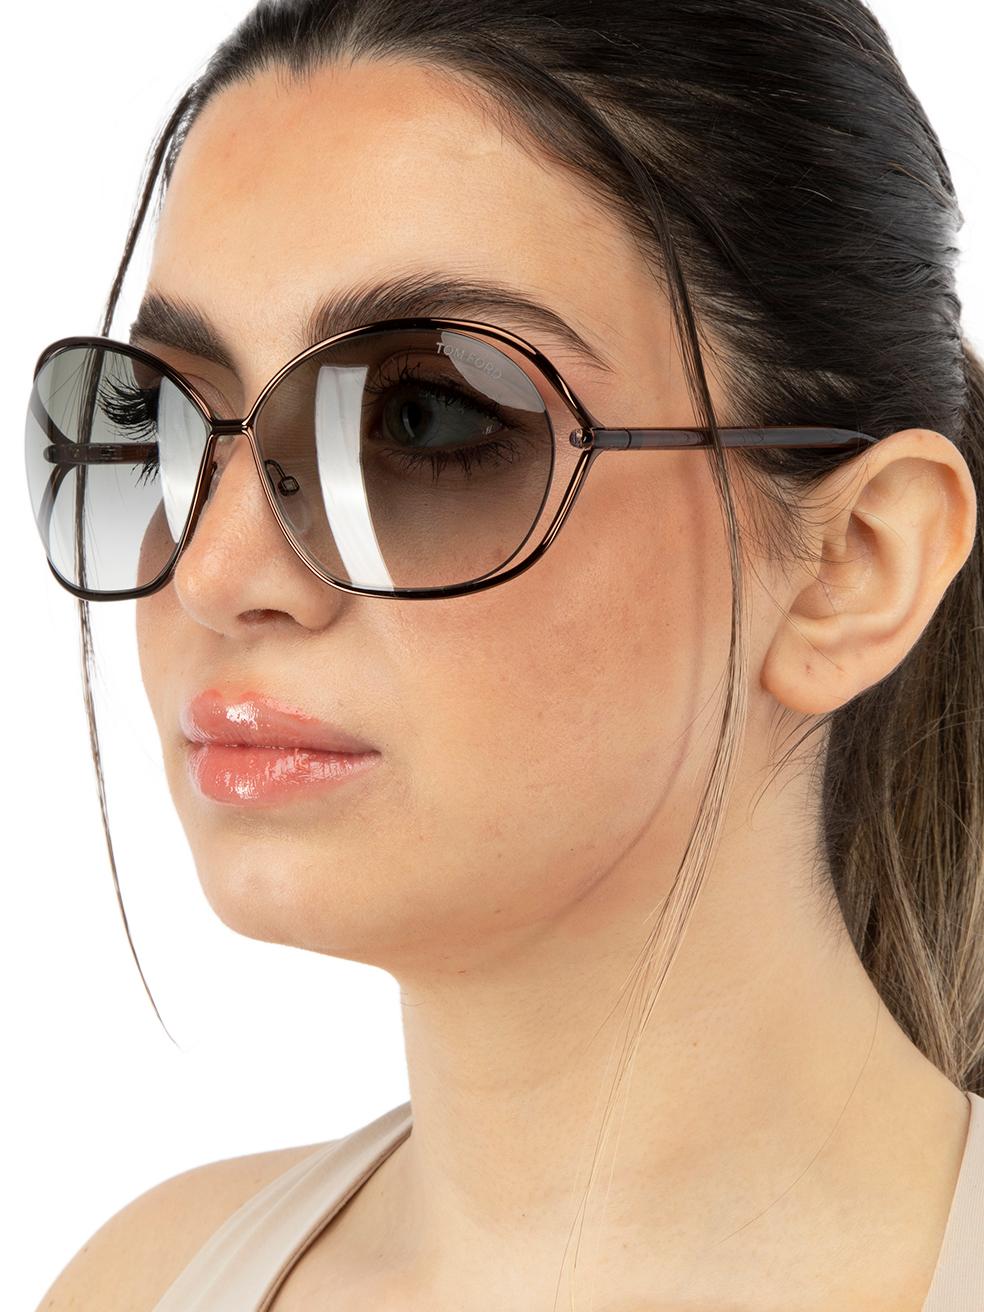 CONDITION is New with tags on this brand new Tom Ford designer item. This item comes with original packaging.
 
 
 
 Details
 
 
 Model: FT0157
 
 Shiny Dark Brown
 
 Metal
 
 Round Sunglasses
 
 Brown Gradient Lens
 
 Full-Rim
 
 100% UV